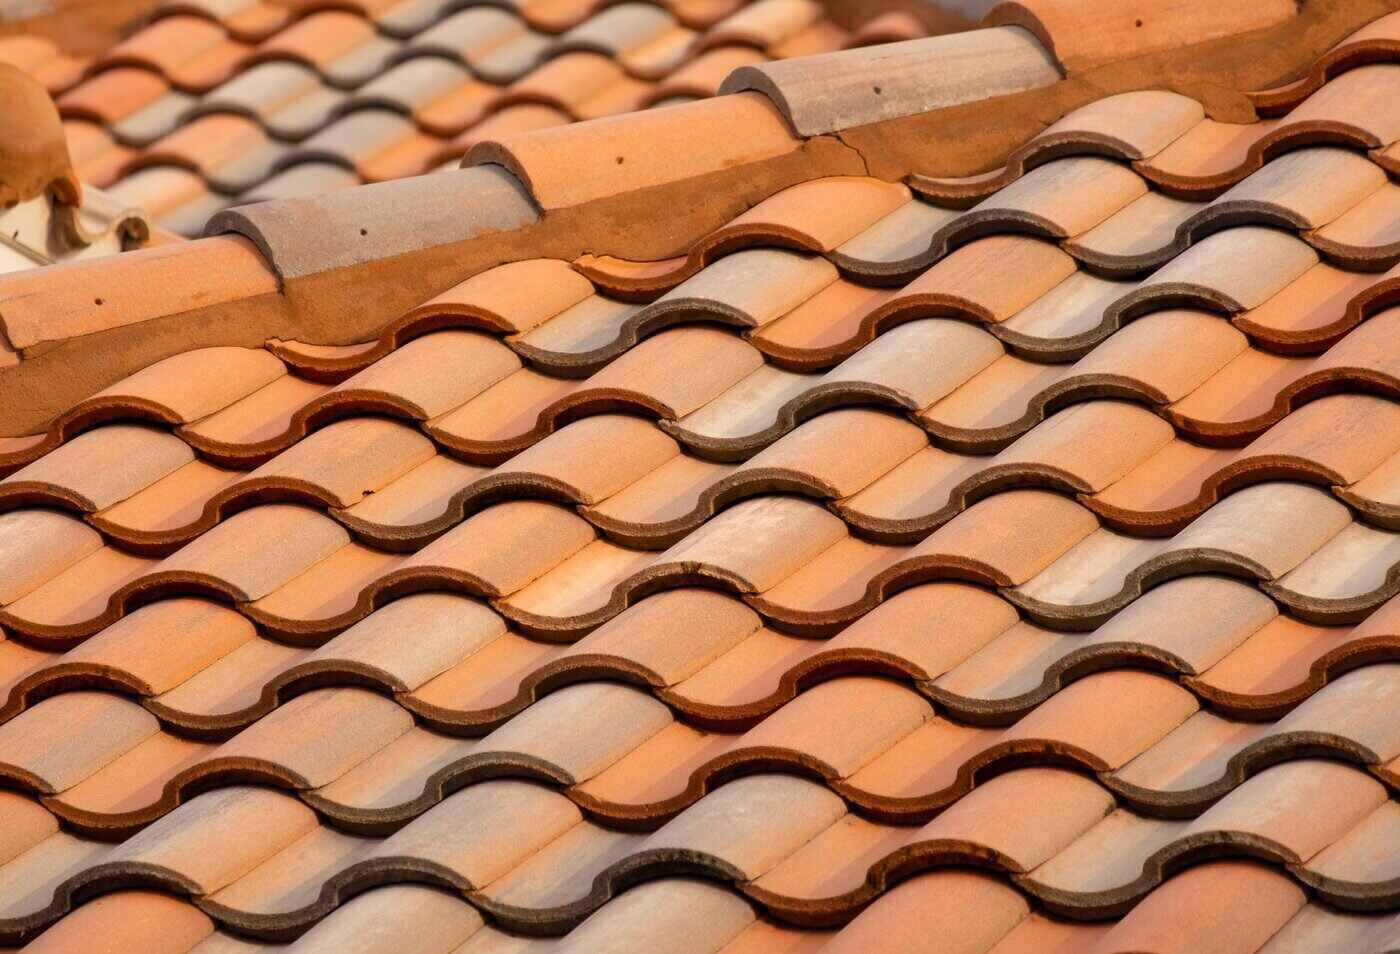 clay tile roof - top 5 environmentally friendly roofing materials